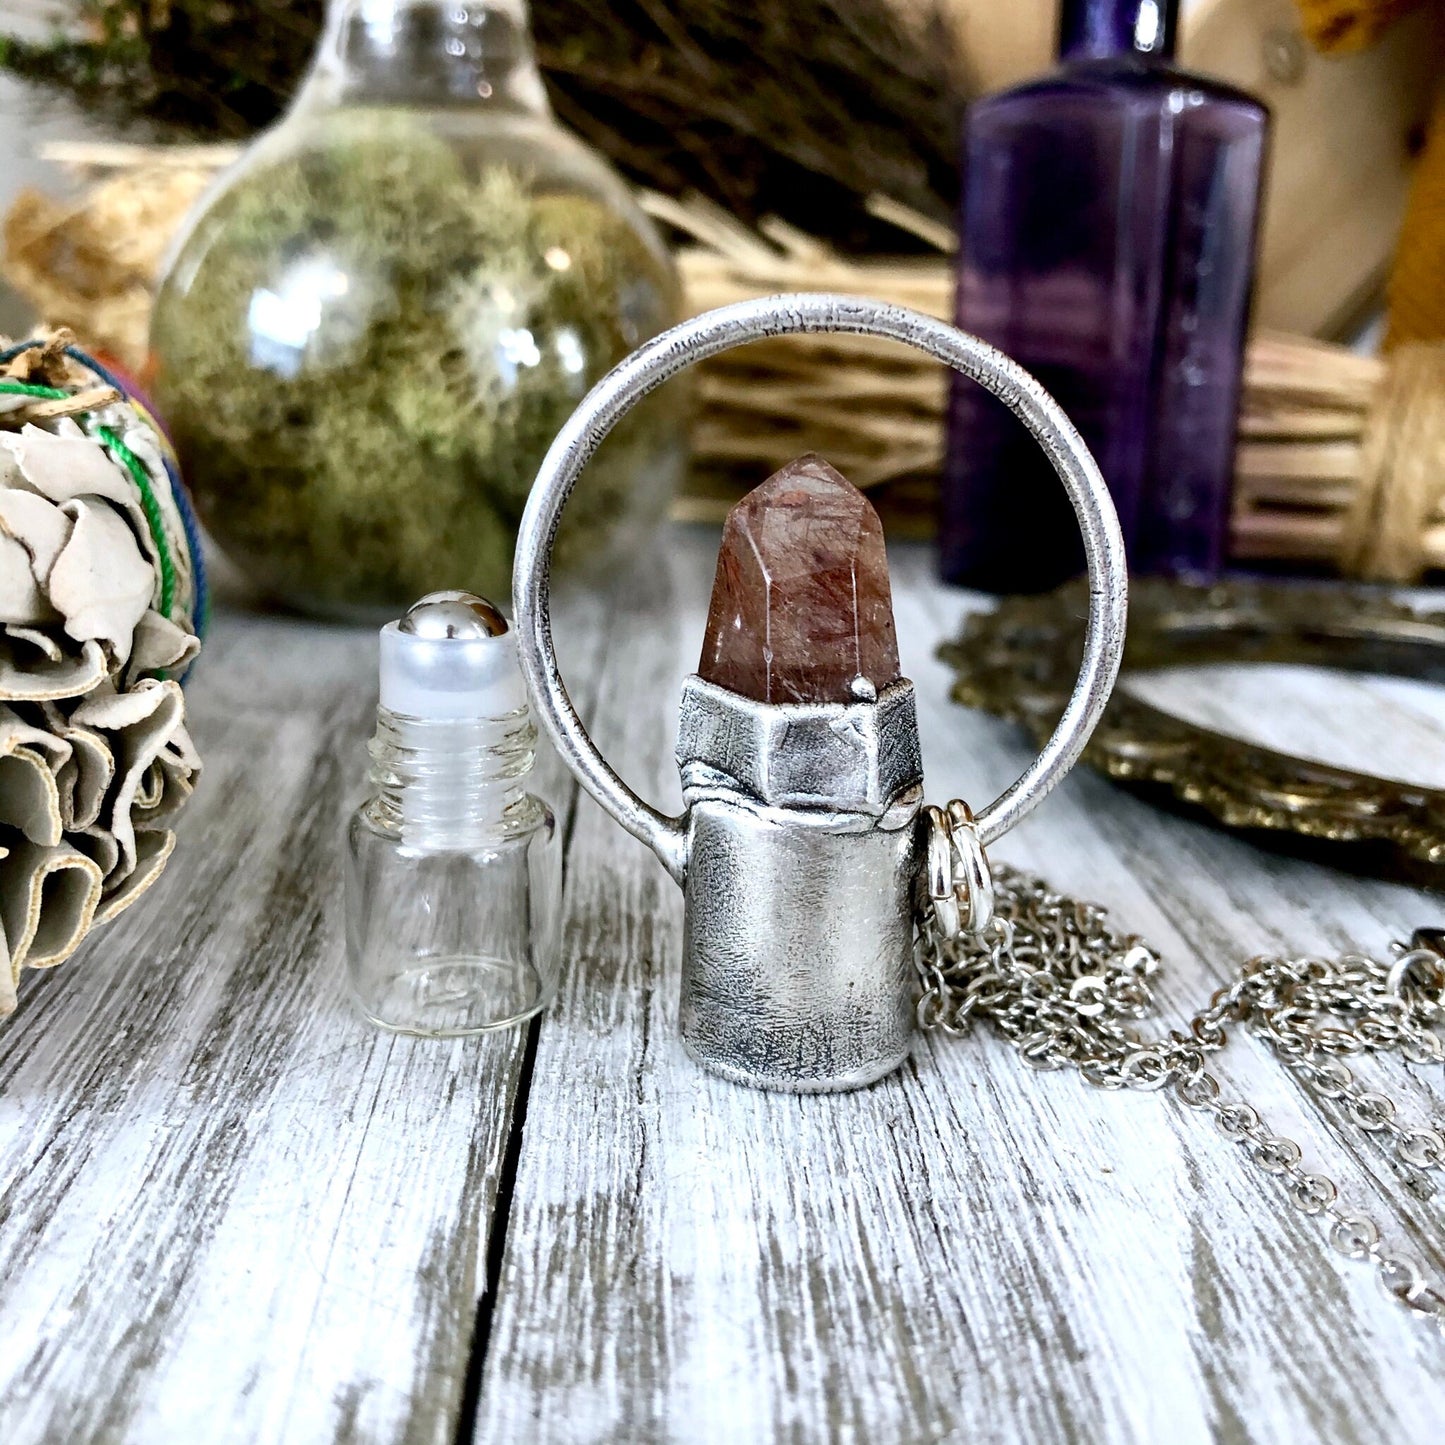 Crystal Jewelry, Crystal Necklaces, Diffuser Jewelry, Diffuser Necklace, Essential Oil Bottle, Essential oil roller, Essential Oil Vial, Essential Oils, Etsy ID: 1063652273, FOXLARK- NECKLACES, Jewelry, Necklaces, oil jewelry, Oil Necklace, Raw crystal ne